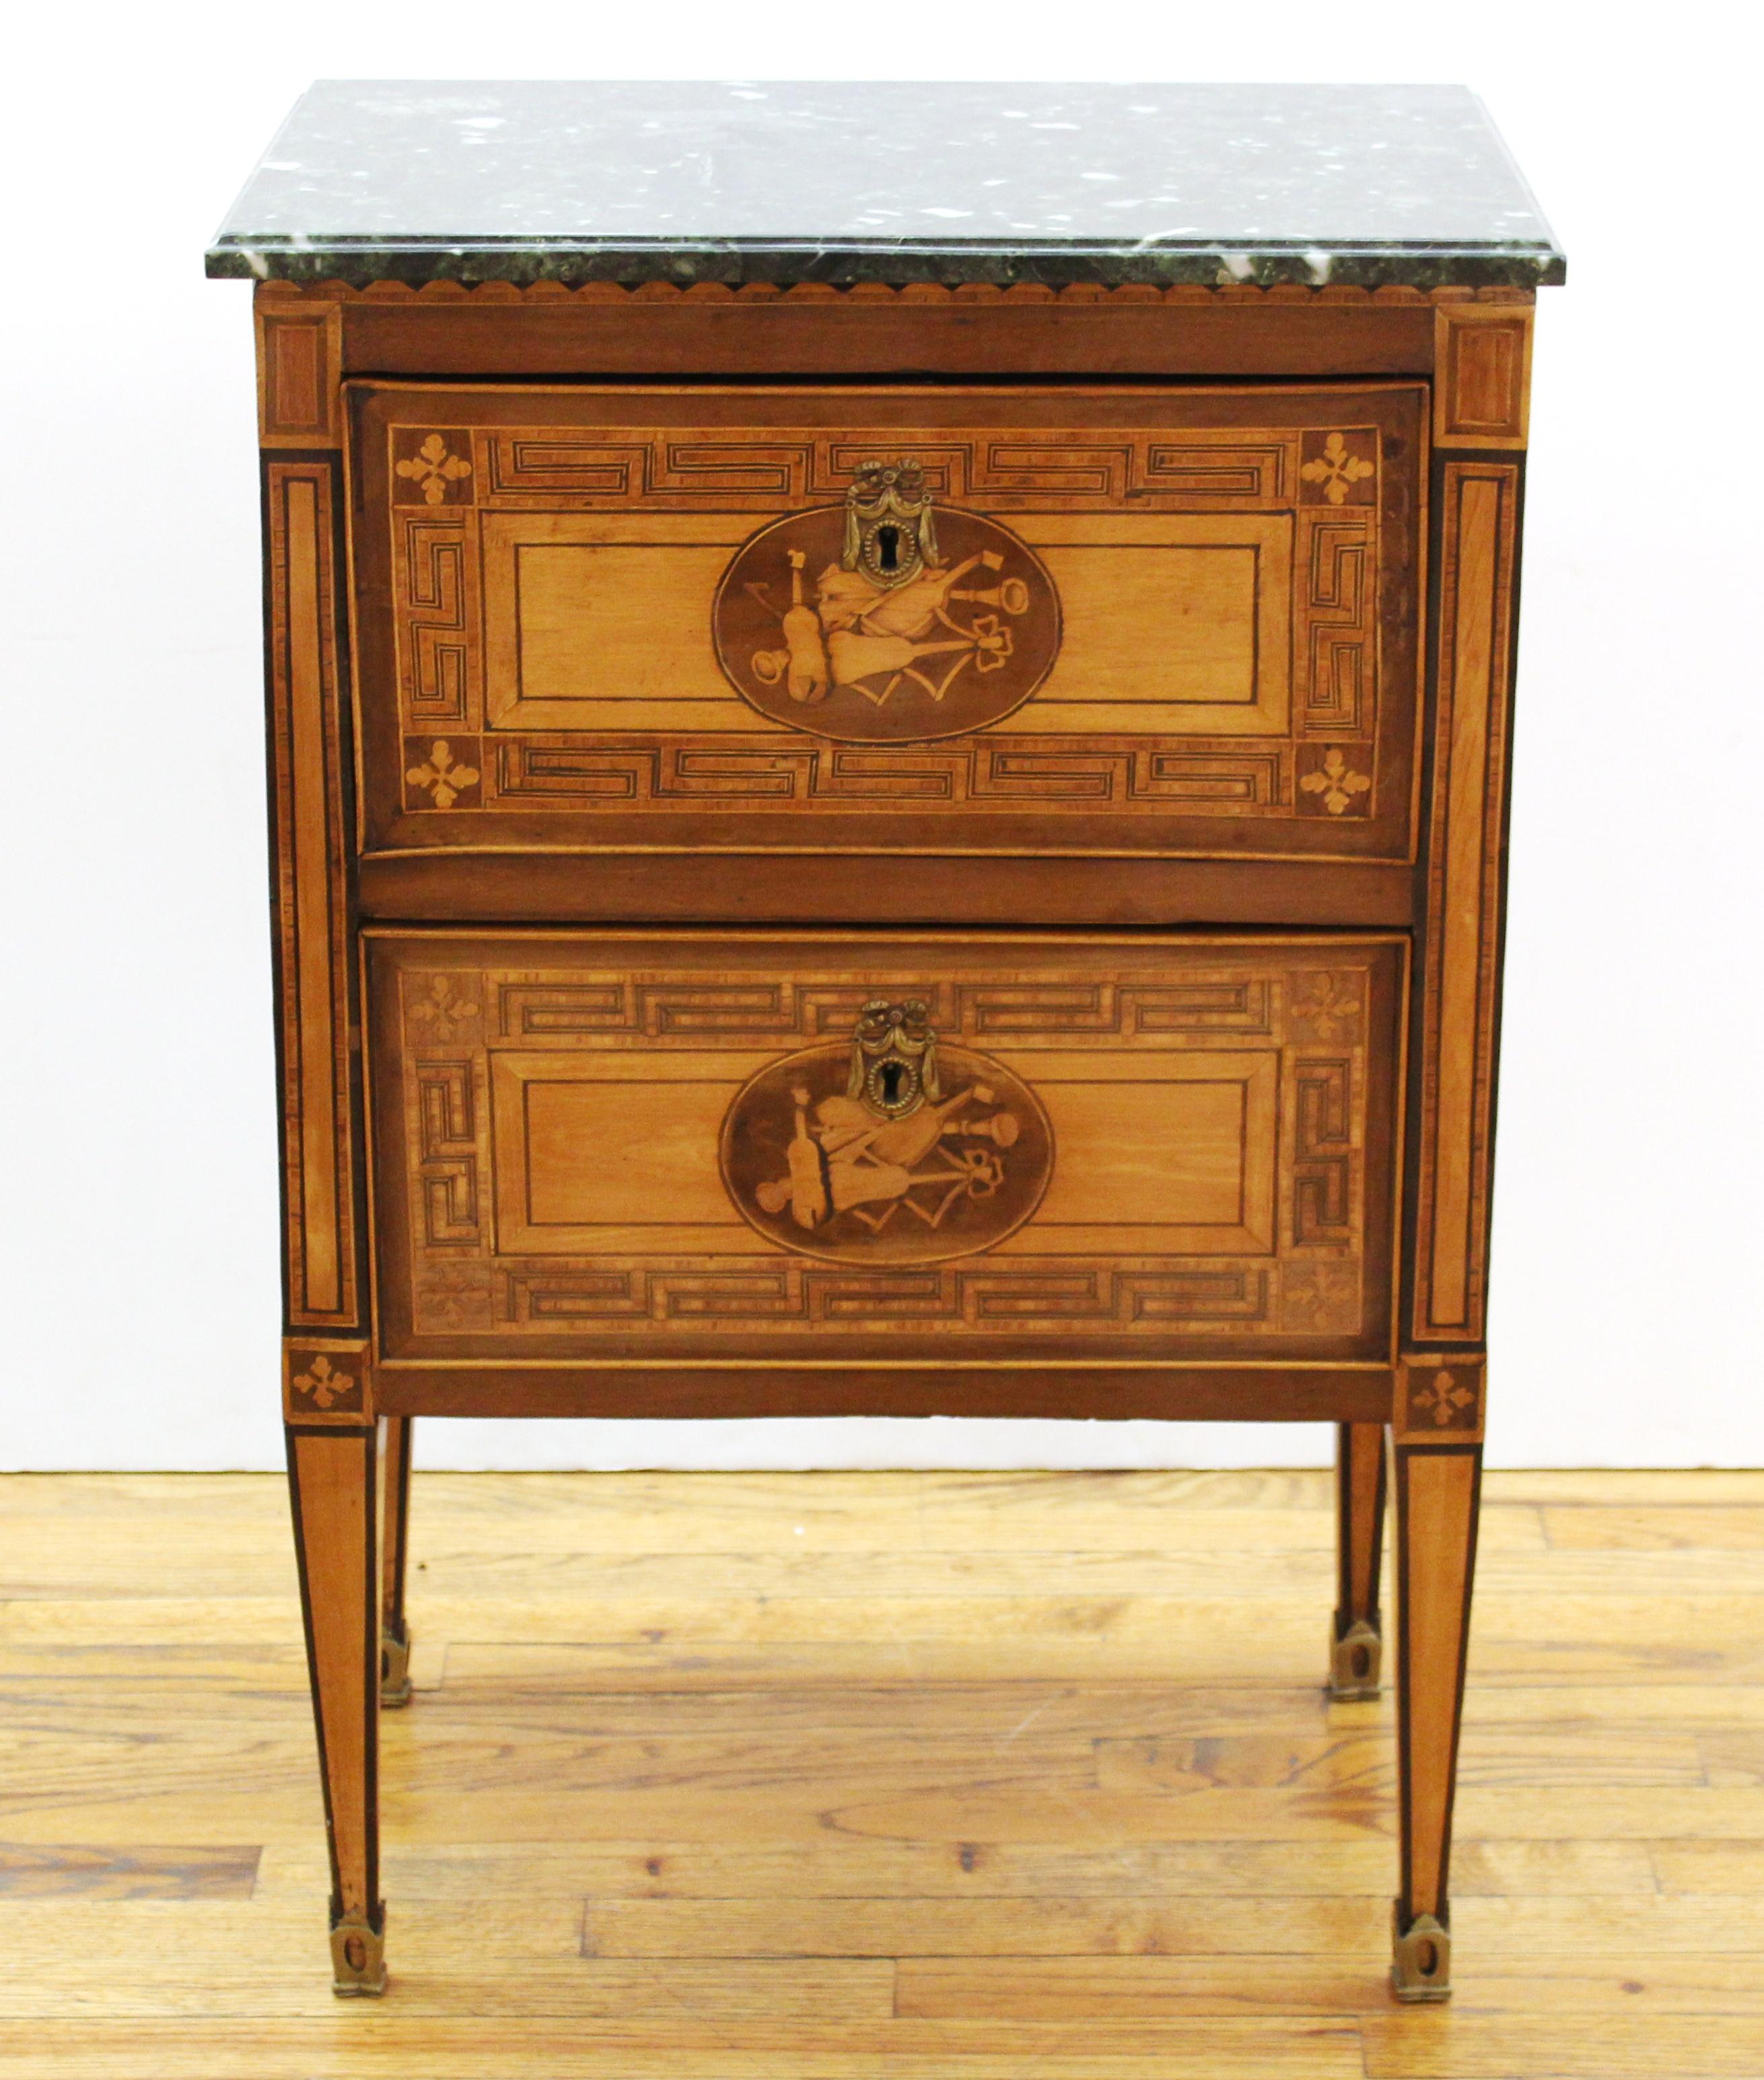 Italian Neoclassical inlaid commodino, circa 1800, the verde antico marble top above the marquetry and parquetry inlaid case, the two drawers centered with cartouches of a musical trophy, raised on tapered square legs. Measures: 34